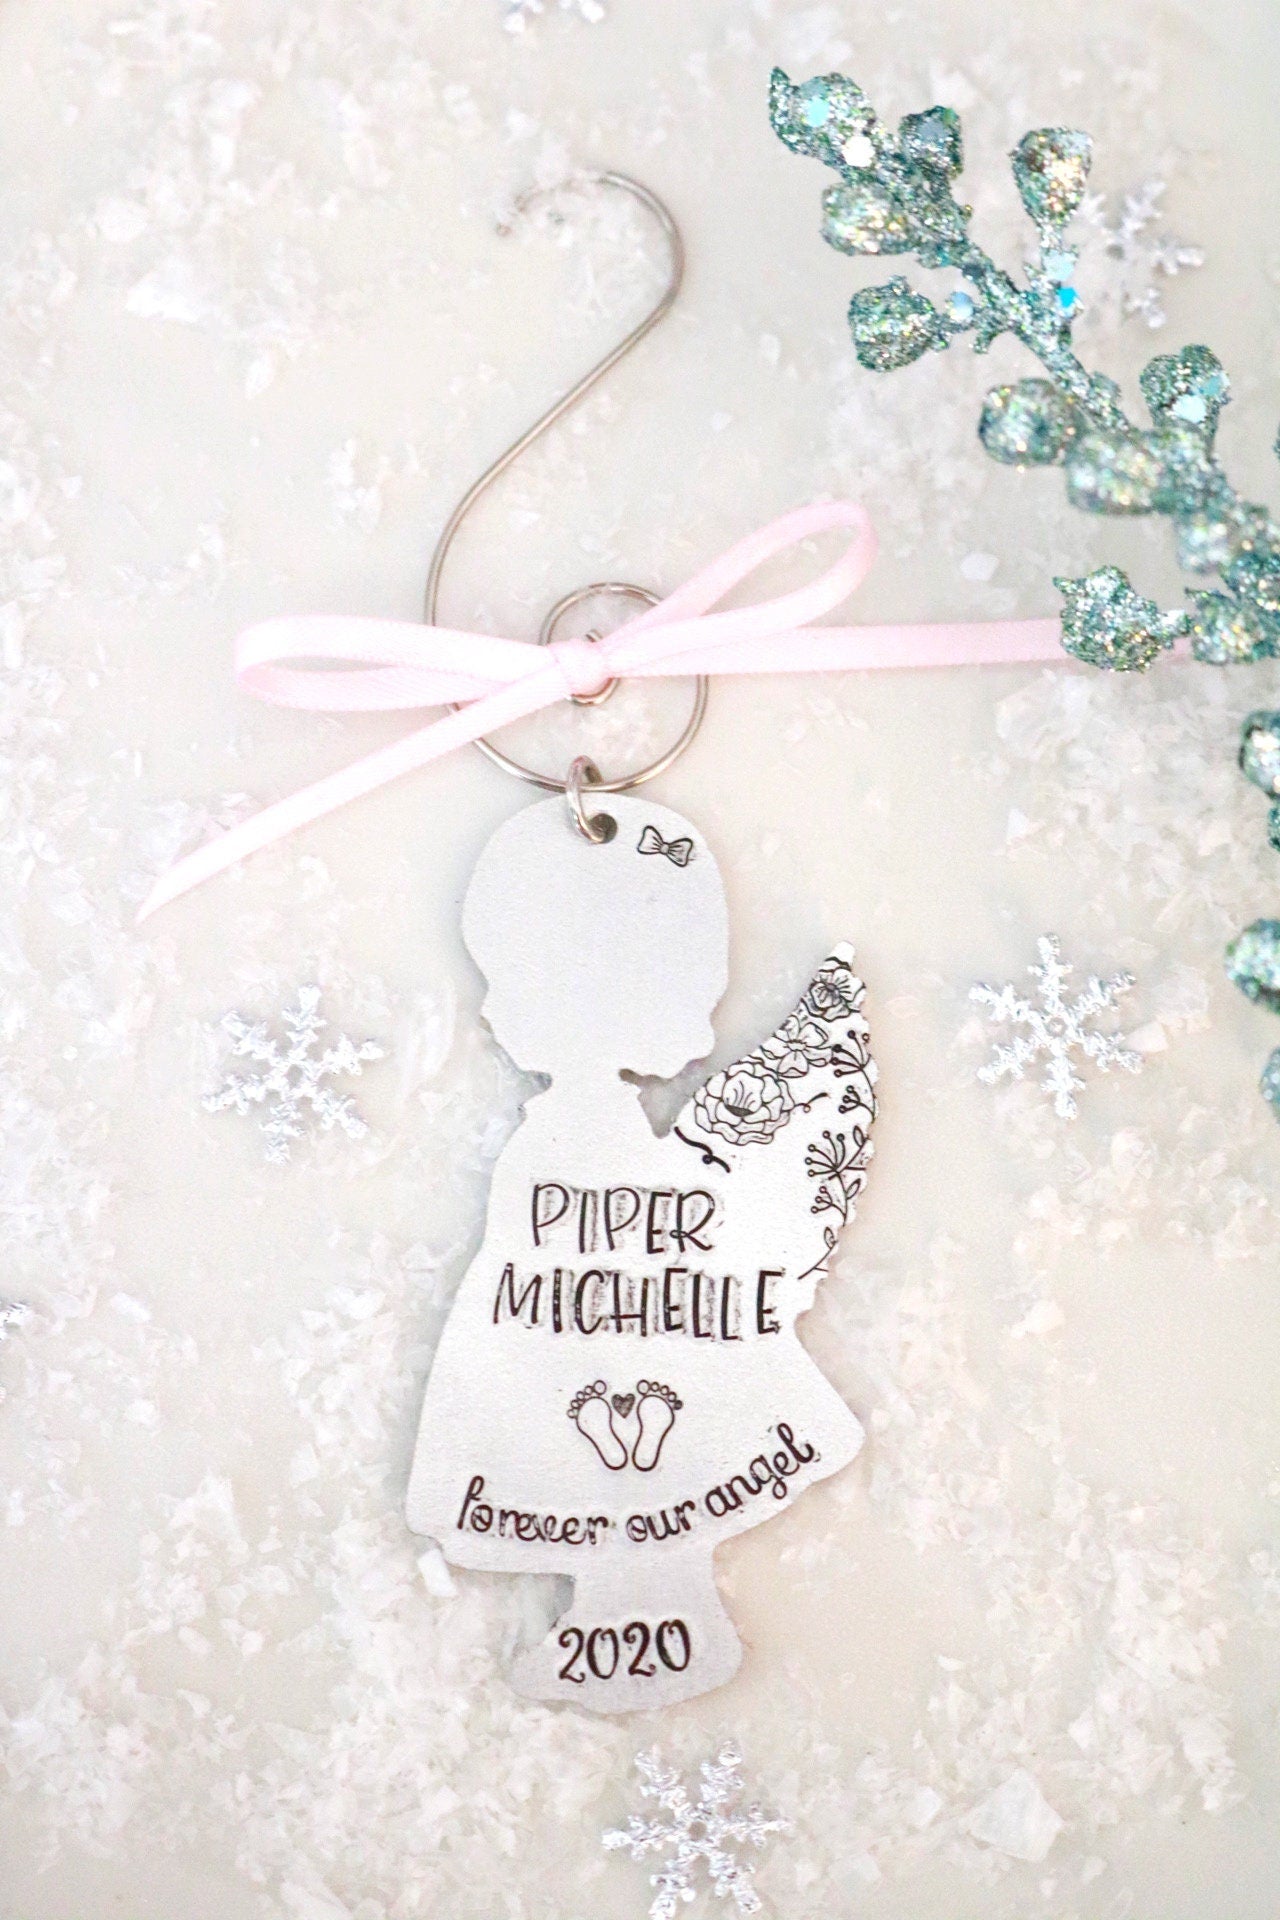 Angel Baby Ornament, Personalized Baby Girl Angel Ornament, Baby Loss Memorial Ornament, Loss of Child Gift, Keepsake Christmas Ornament